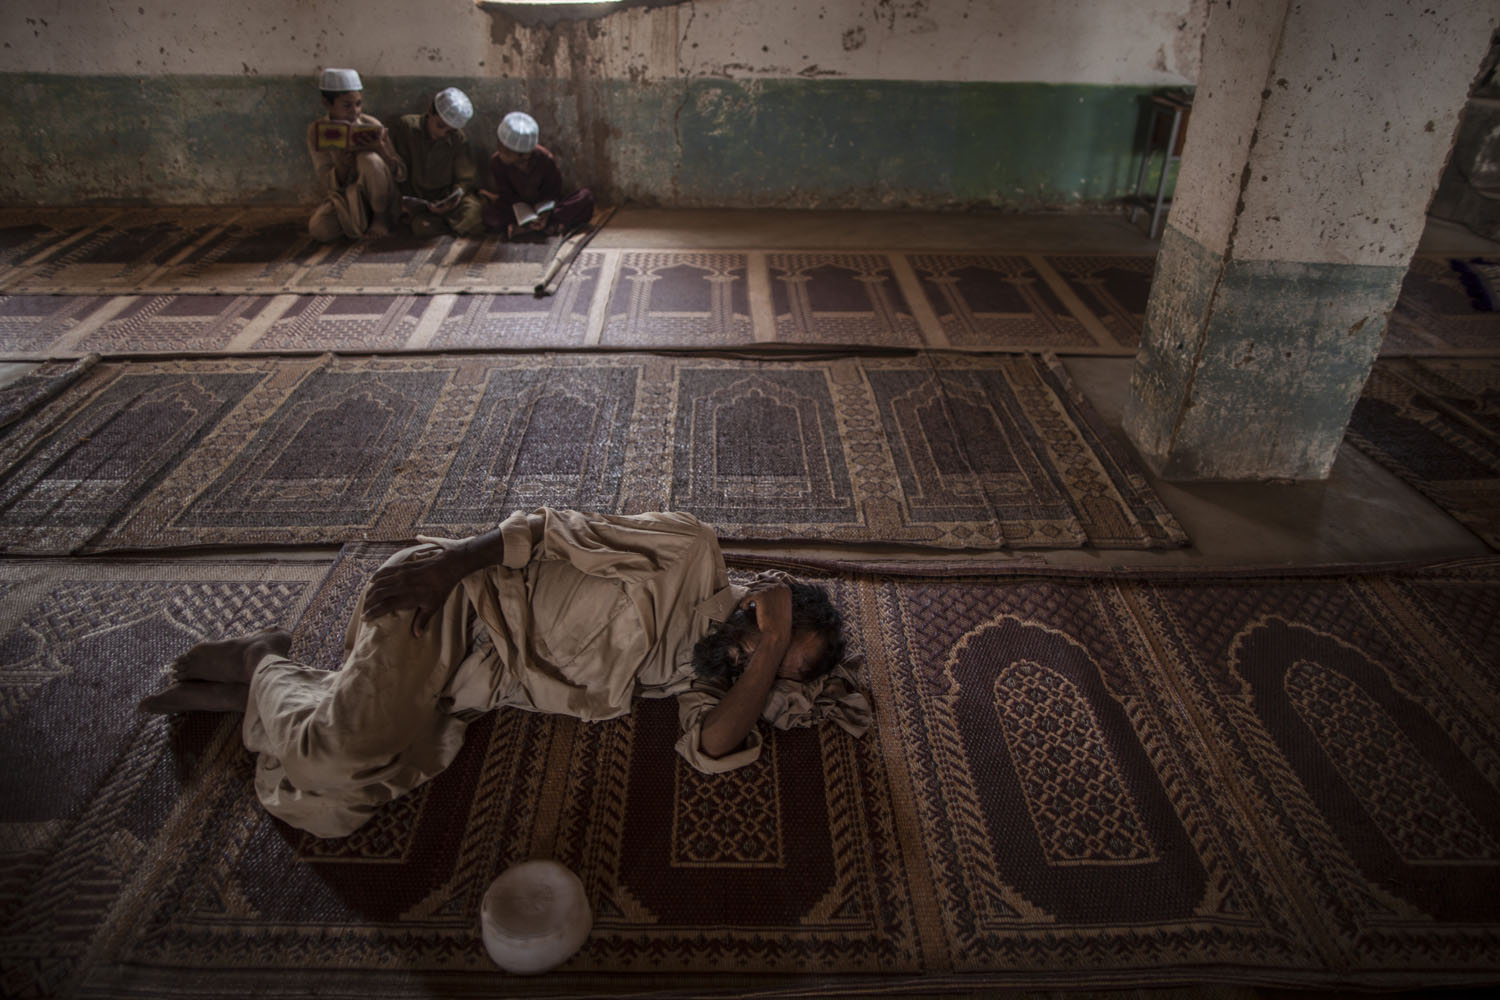 July 17, 2013. An Afghan refugee sleeps on the floor of a mosque, while children read verses of the Quran, during the holy fasting month of Ramadan, on the outskirts of Islamabad, Pakistan.